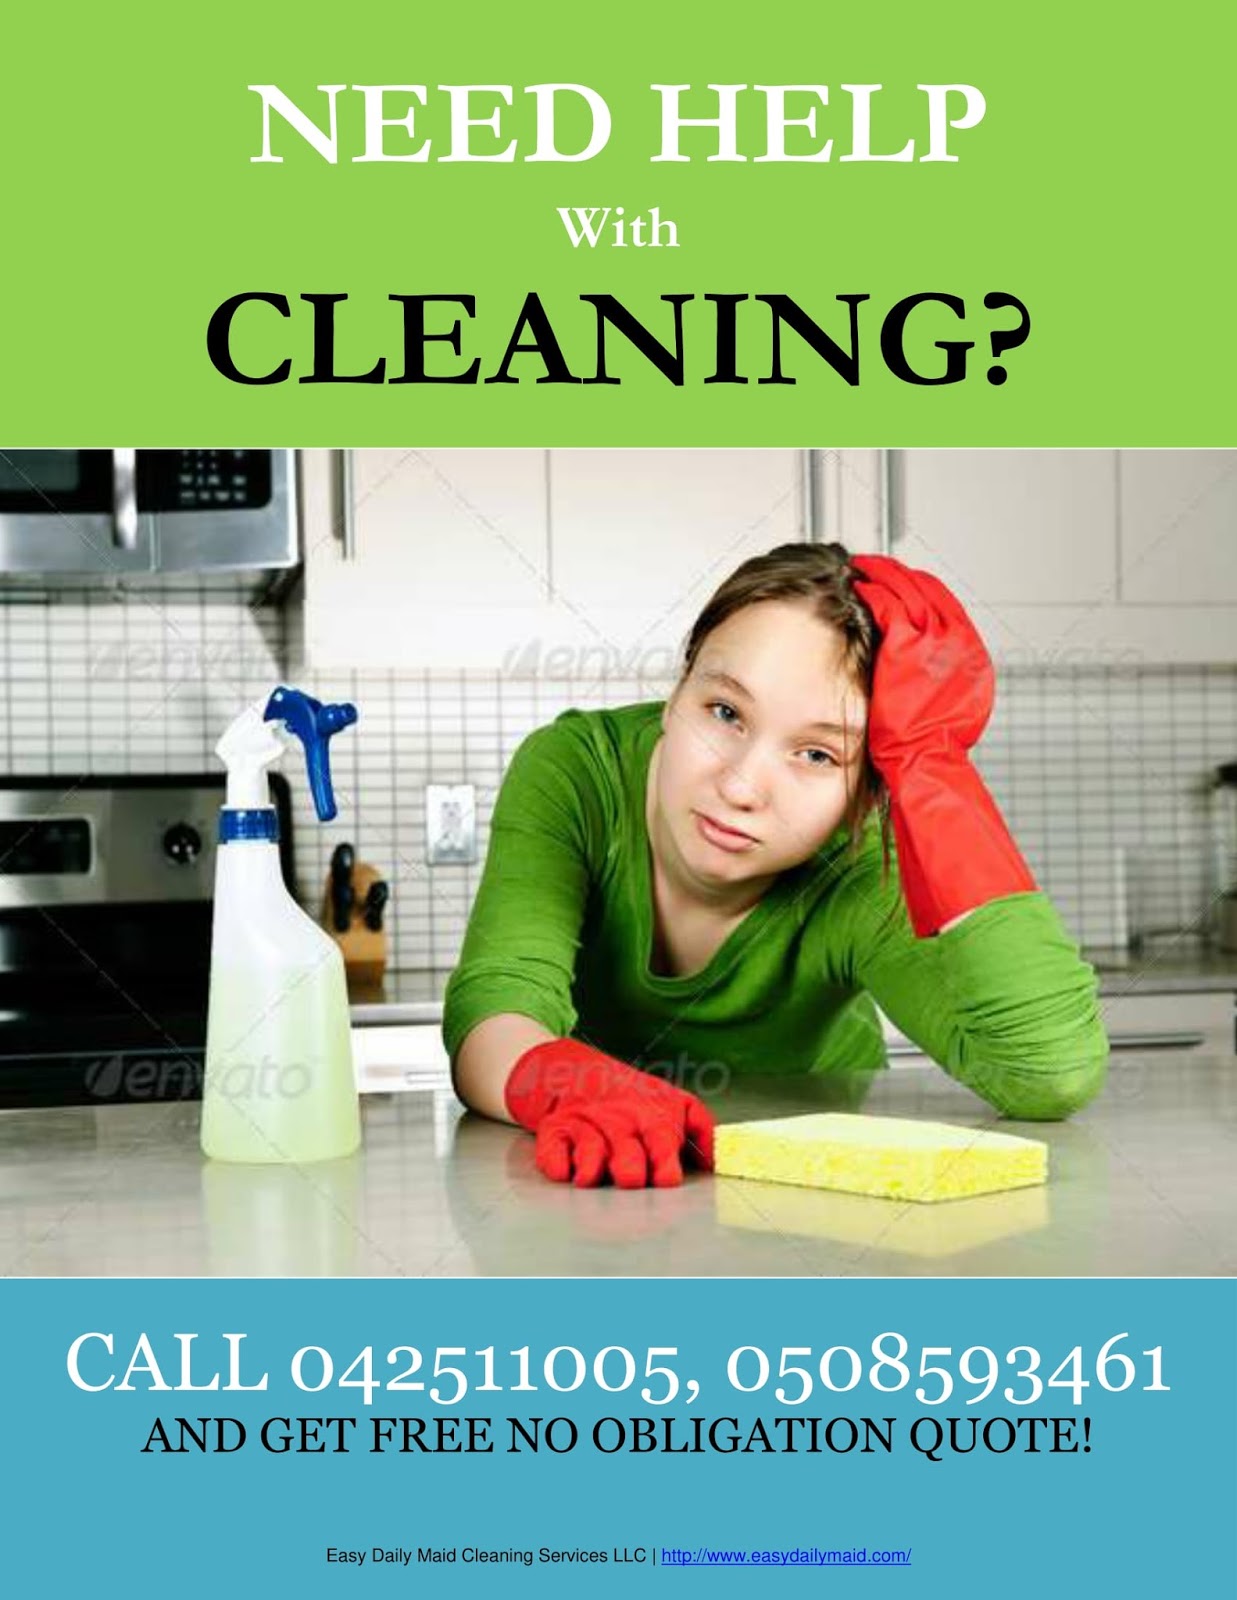 Edm Commercial Cleaning Services Cleaning Made Easy